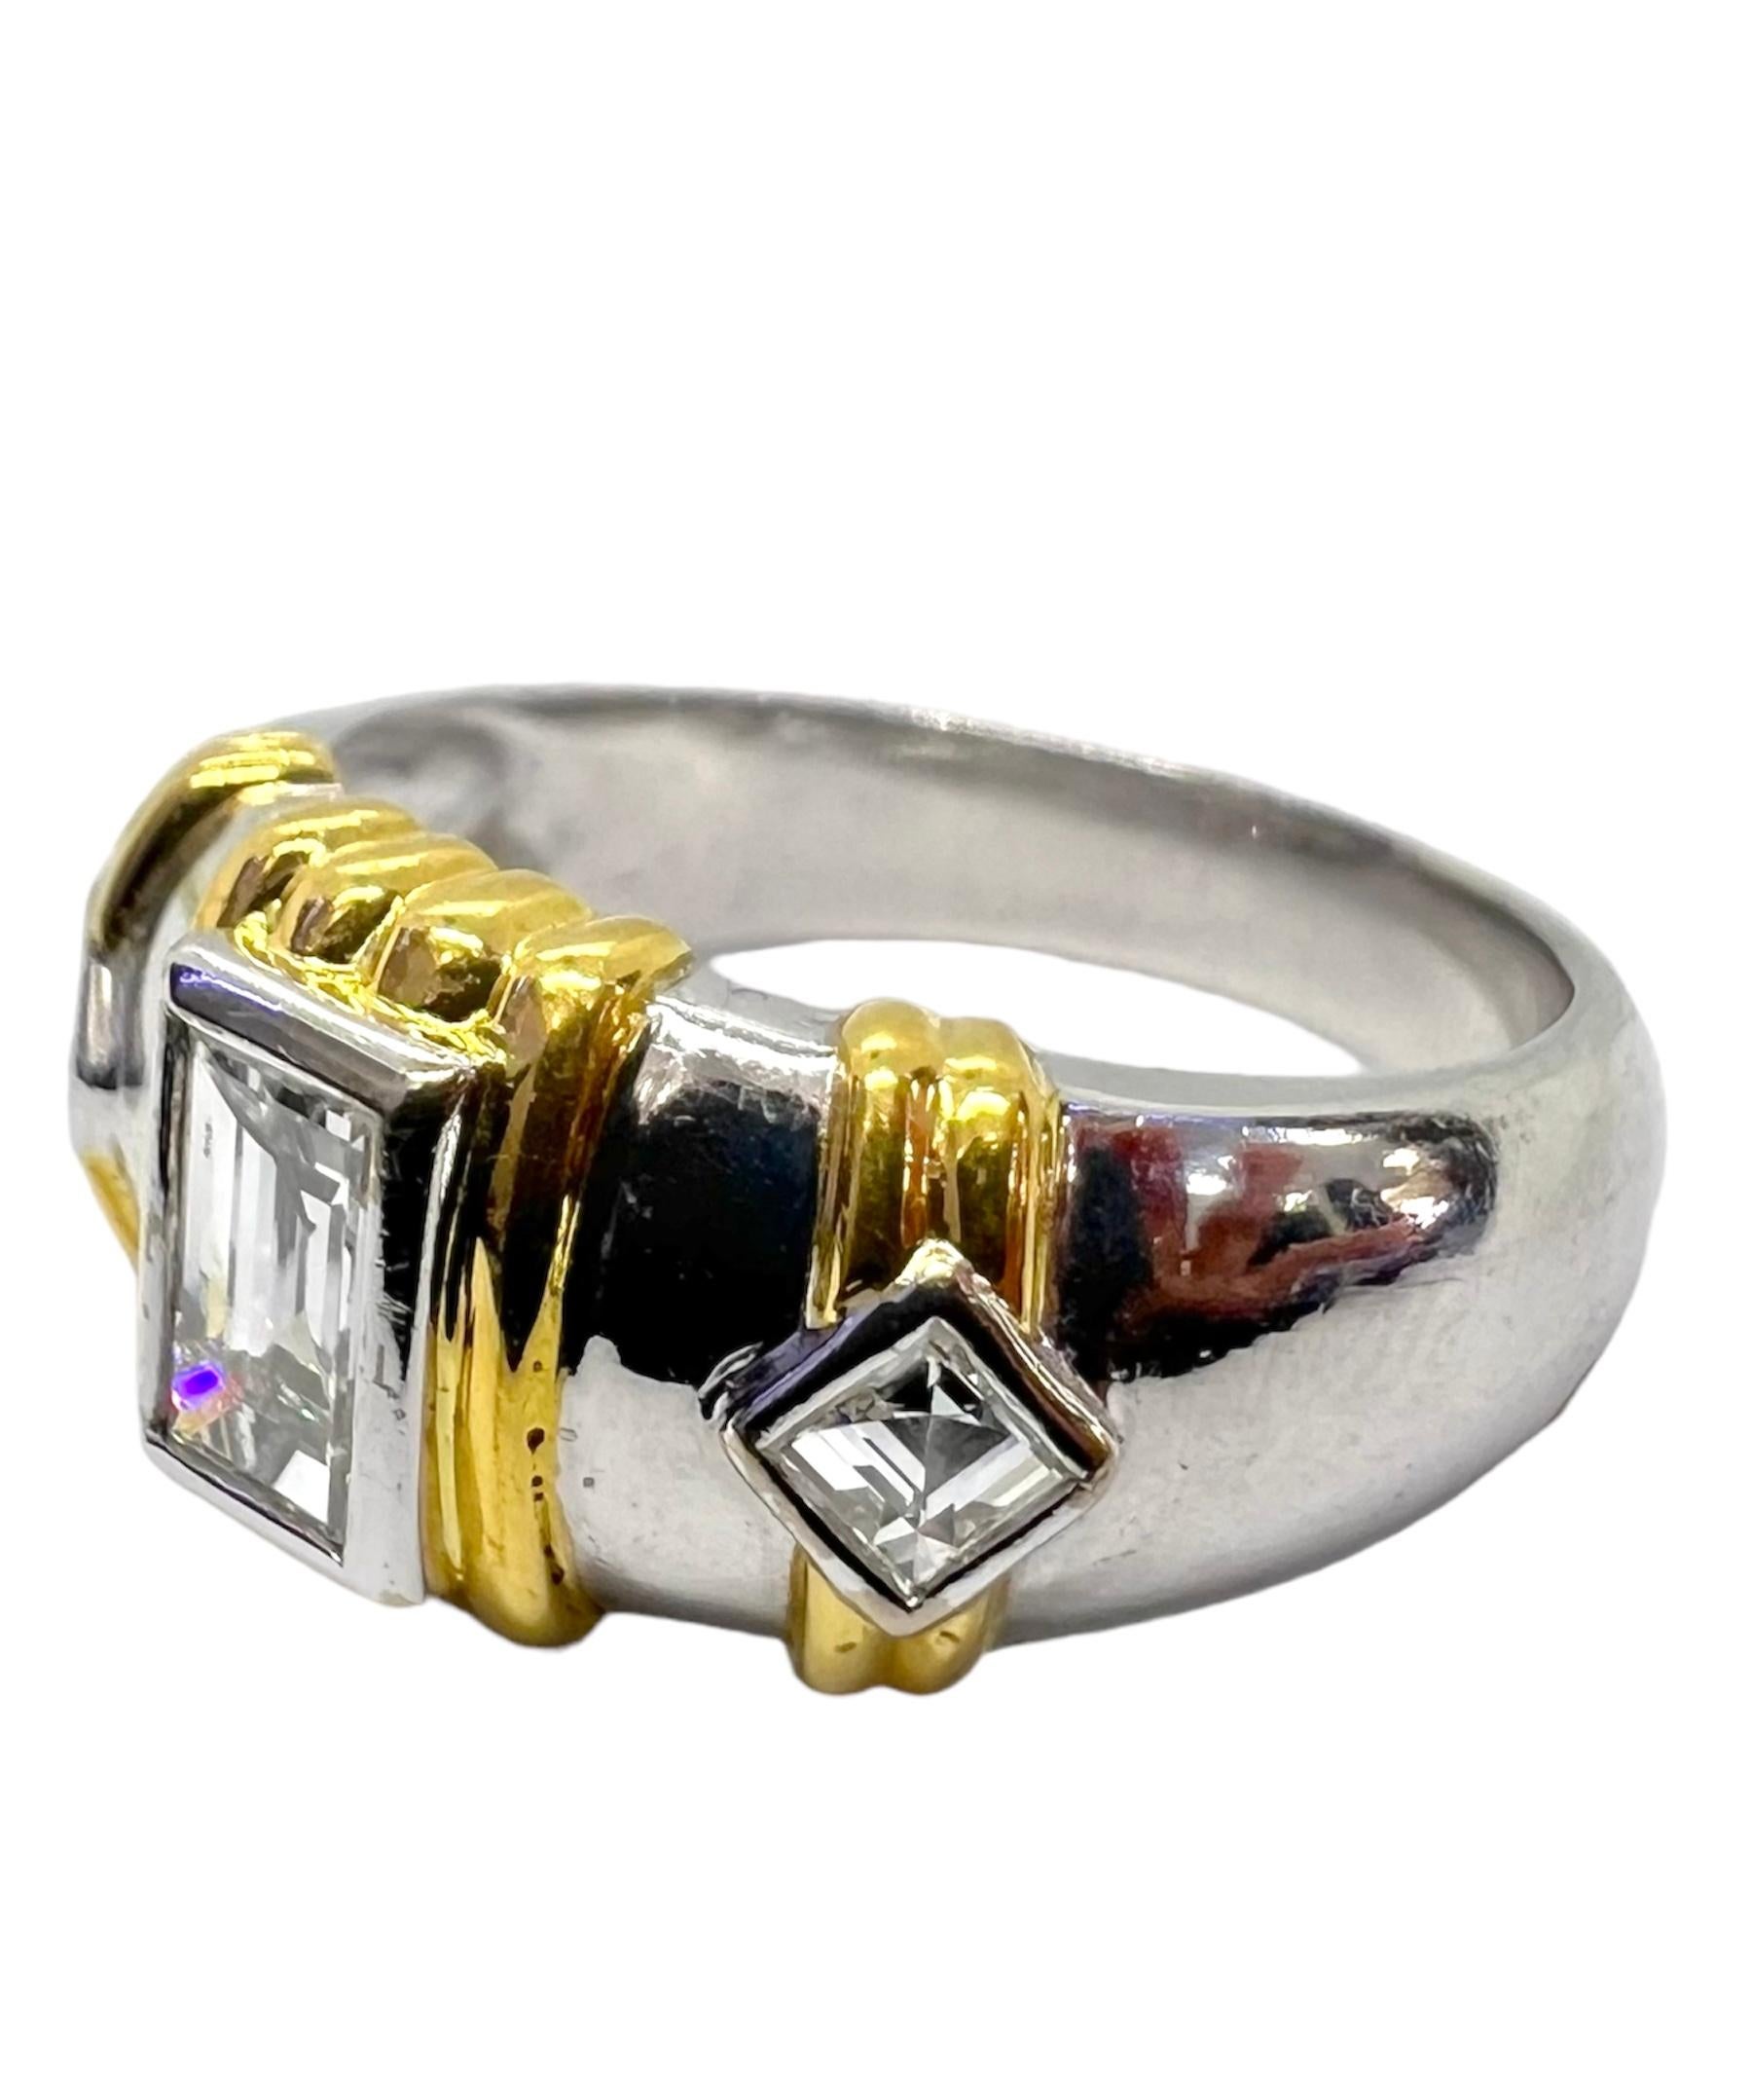 18K yellow gold and white gold ring with emerald cut diamond and square cut diamond.

Sophia D by Joseph Dardashti LTD has been known worldwide for 35 years and are inspired by classic Art Deco design that merges with modern manufacturing